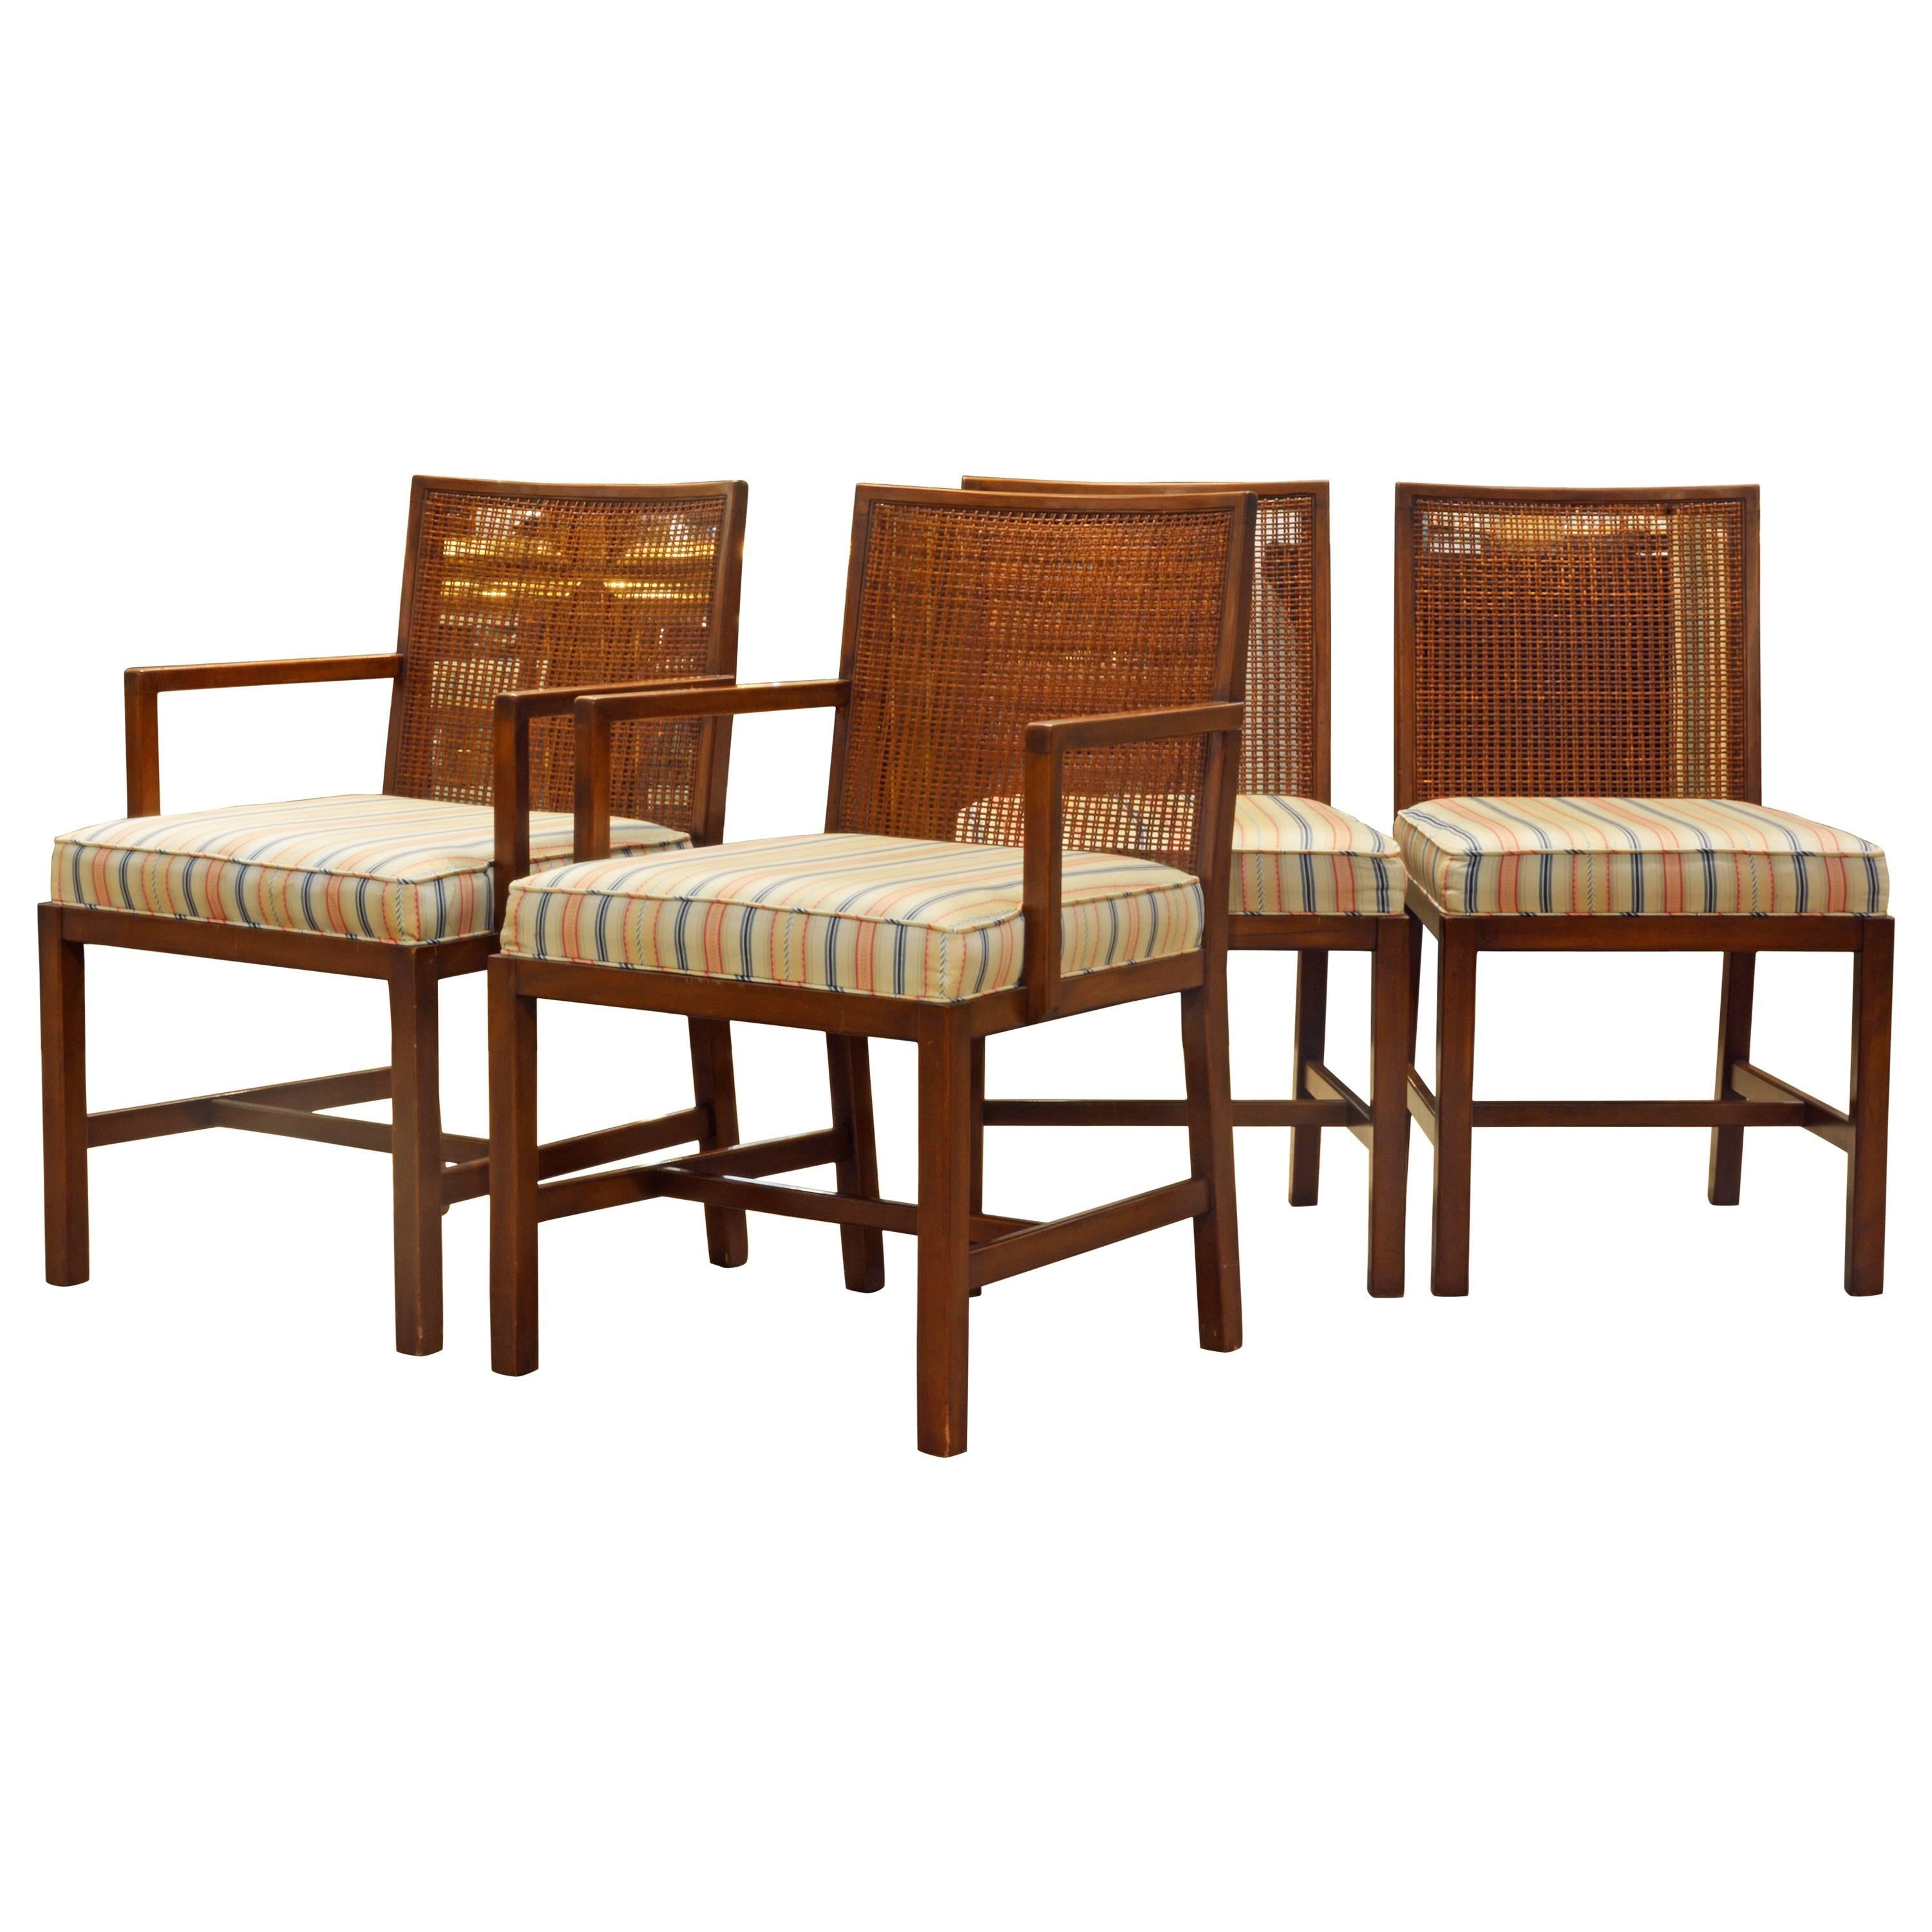 Set of Four Scandinavian Style Cane Back Dining Chairs Manner of Michael Taylor